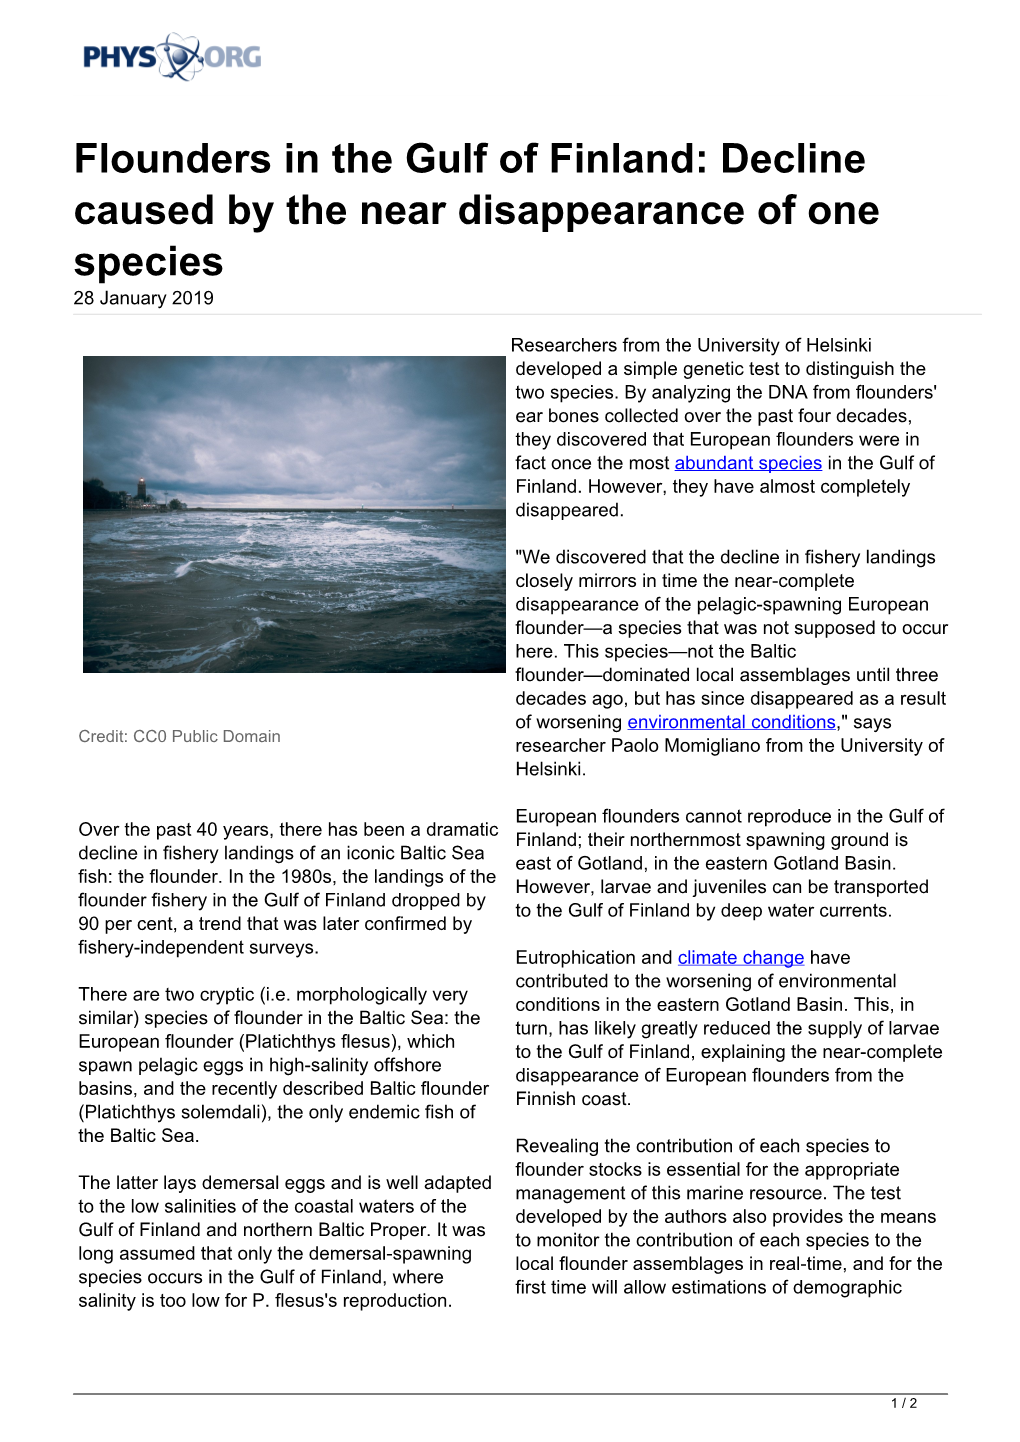 Flounders in the Gulf of Finland: Decline Caused by the Near Disappearance of One Species 28 January 2019